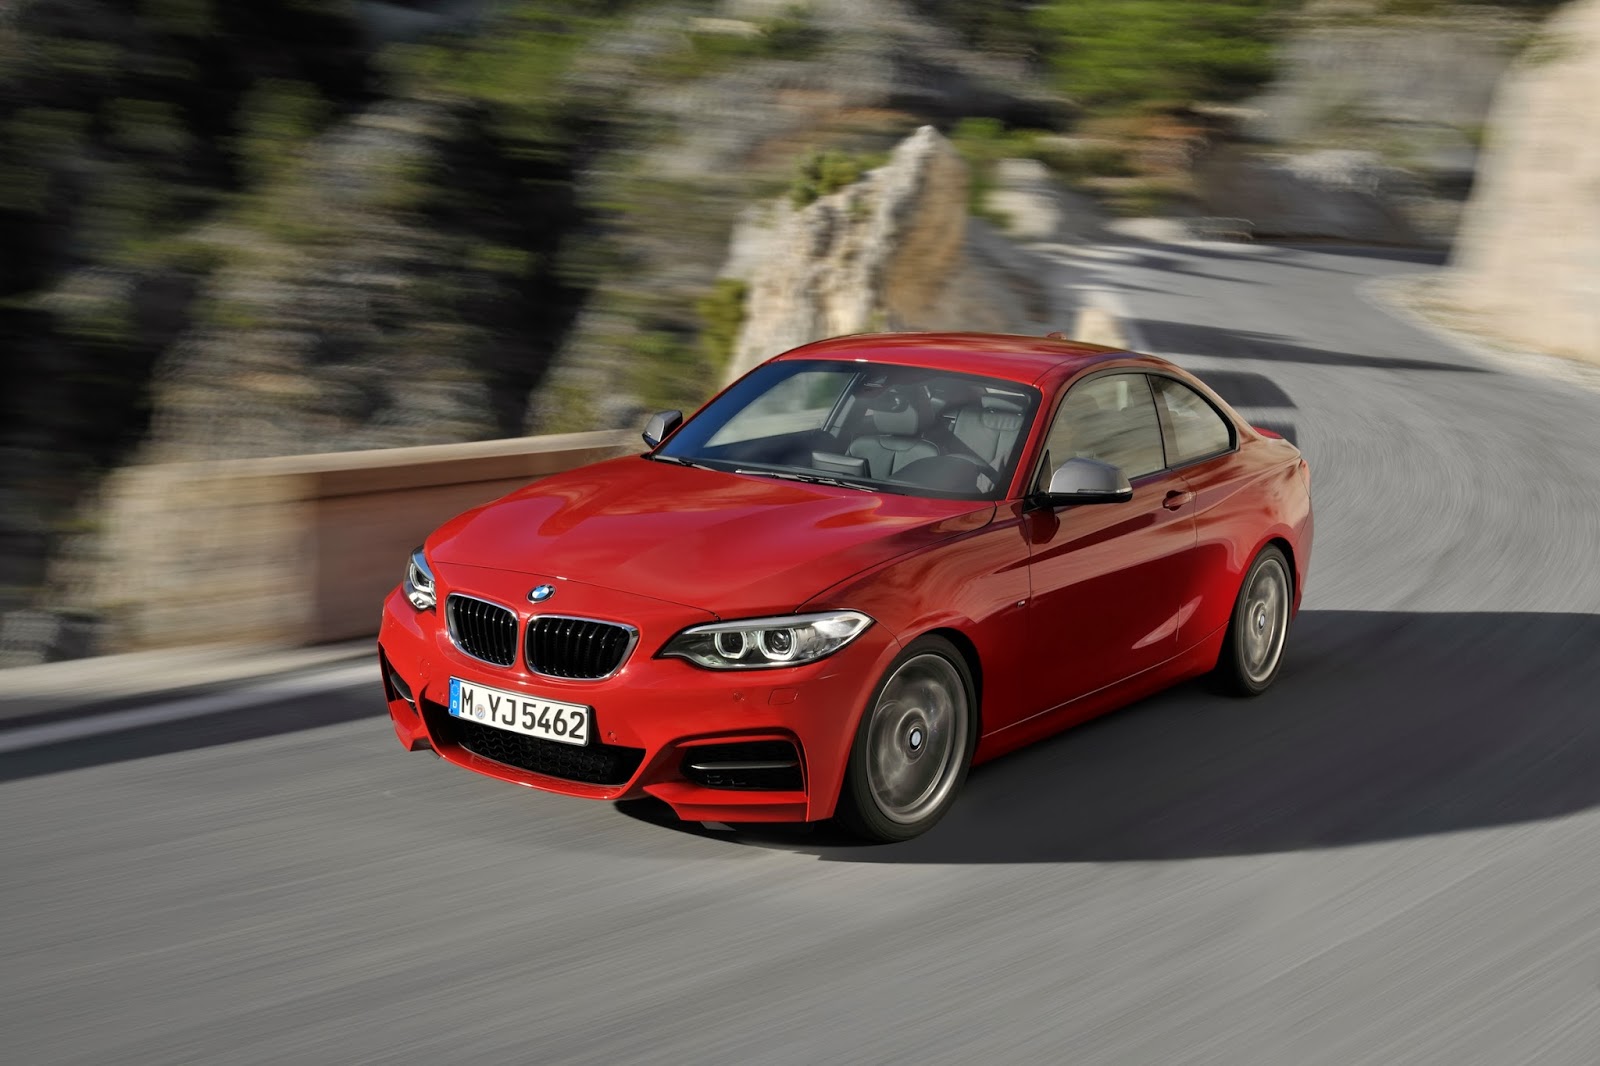 Town+Country BMW | MINI Markham Blog: The All-New BMW 2 Series Coupe